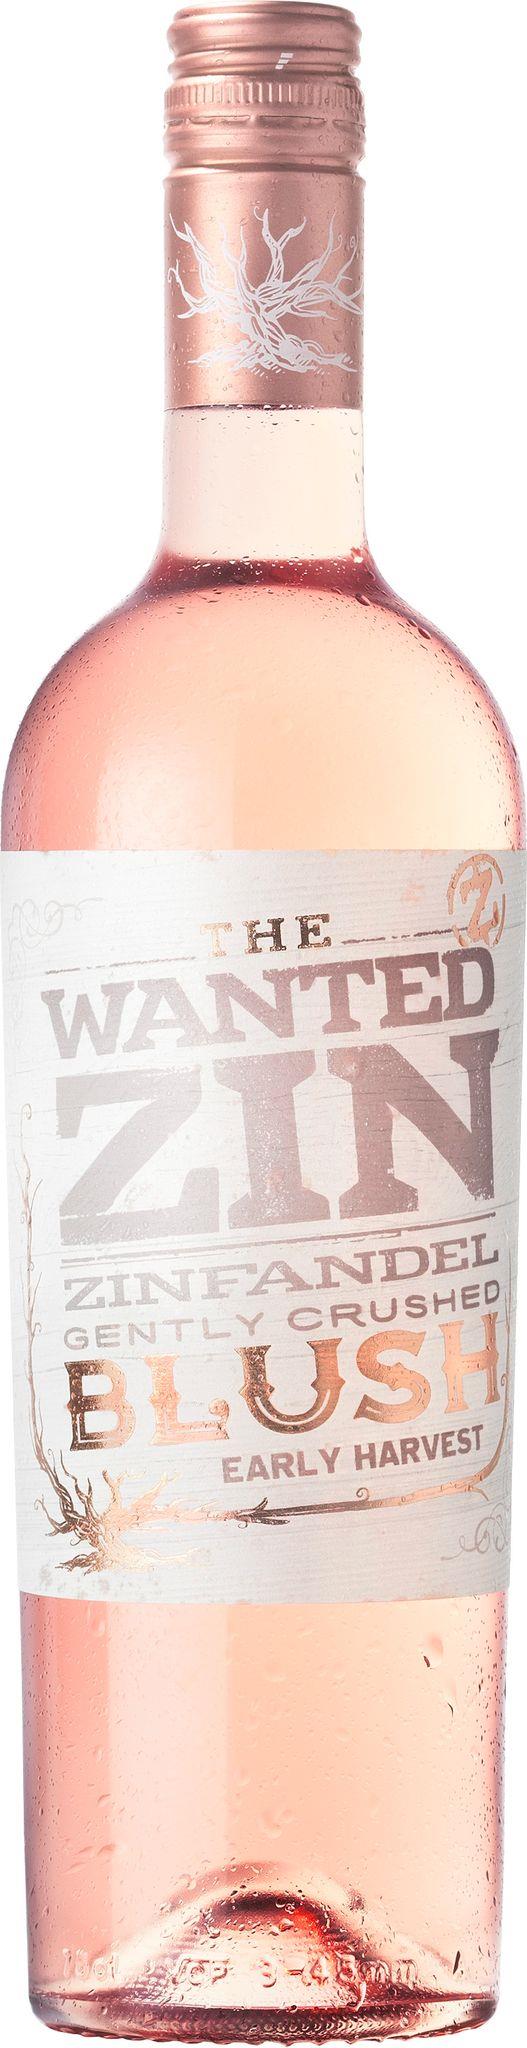 The Wanted Zin Blush